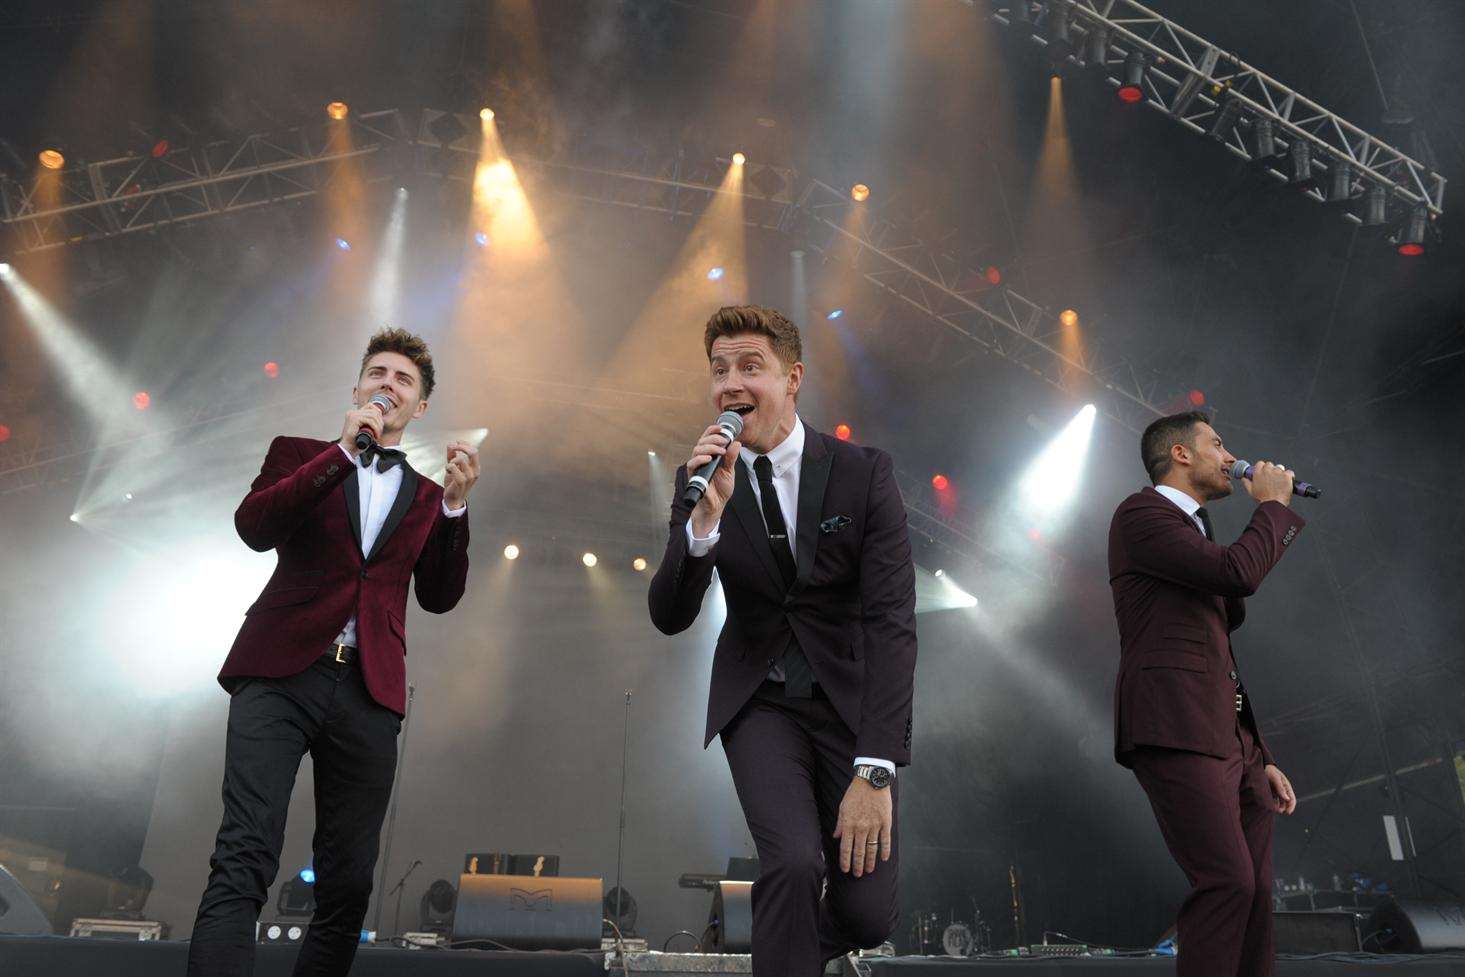 Jack Pack wowed the crowds with their Sinatra covers